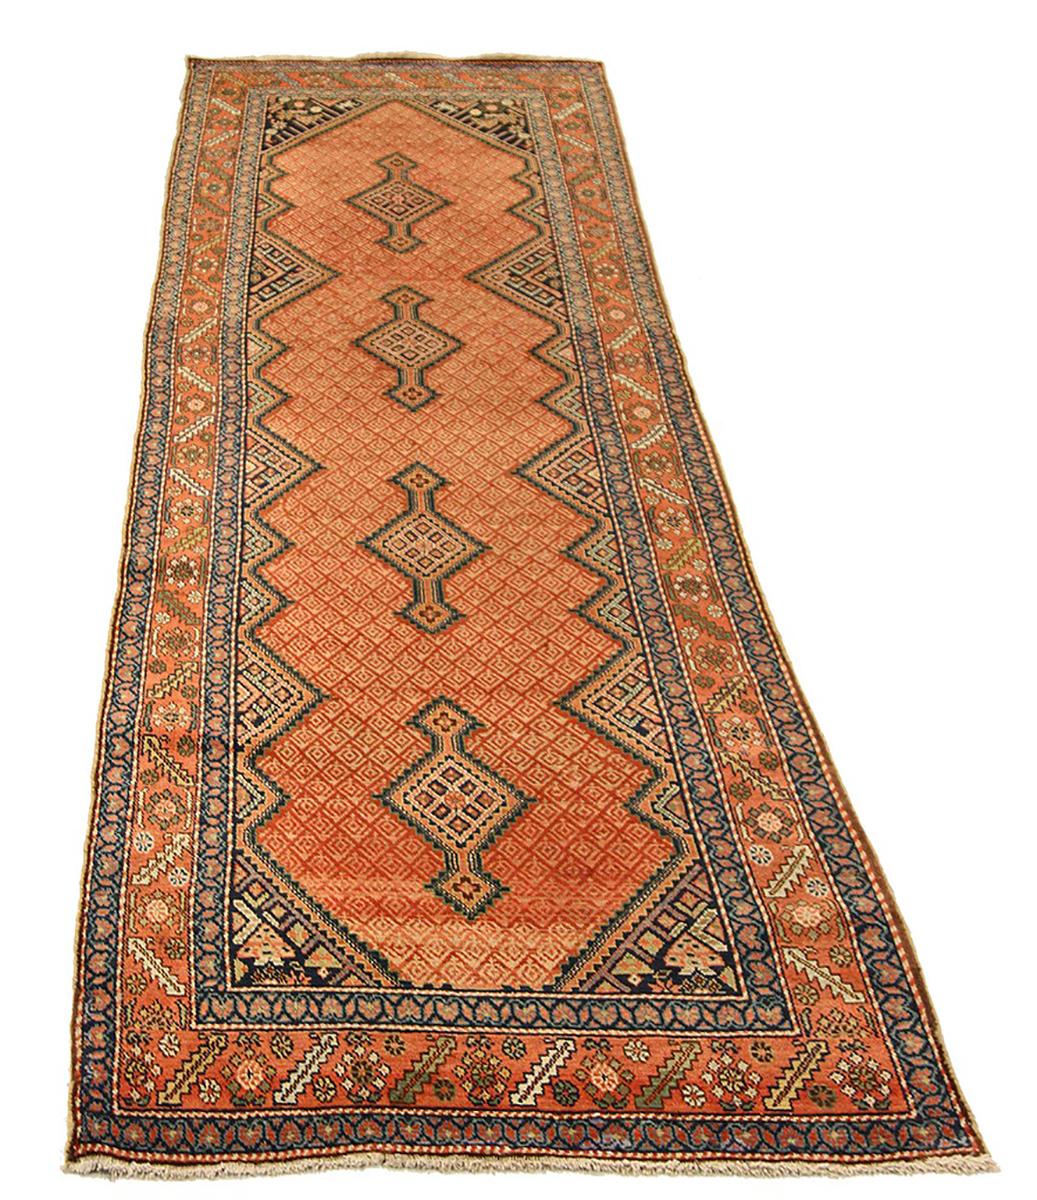 Antique Persian rug handwoven from the finest sheep’s wool and colored with all-natural vegetable dyes that are safe for humans and pets. It’s a traditional Malayer design featuring a beautiful combination of geometric and floral details in black